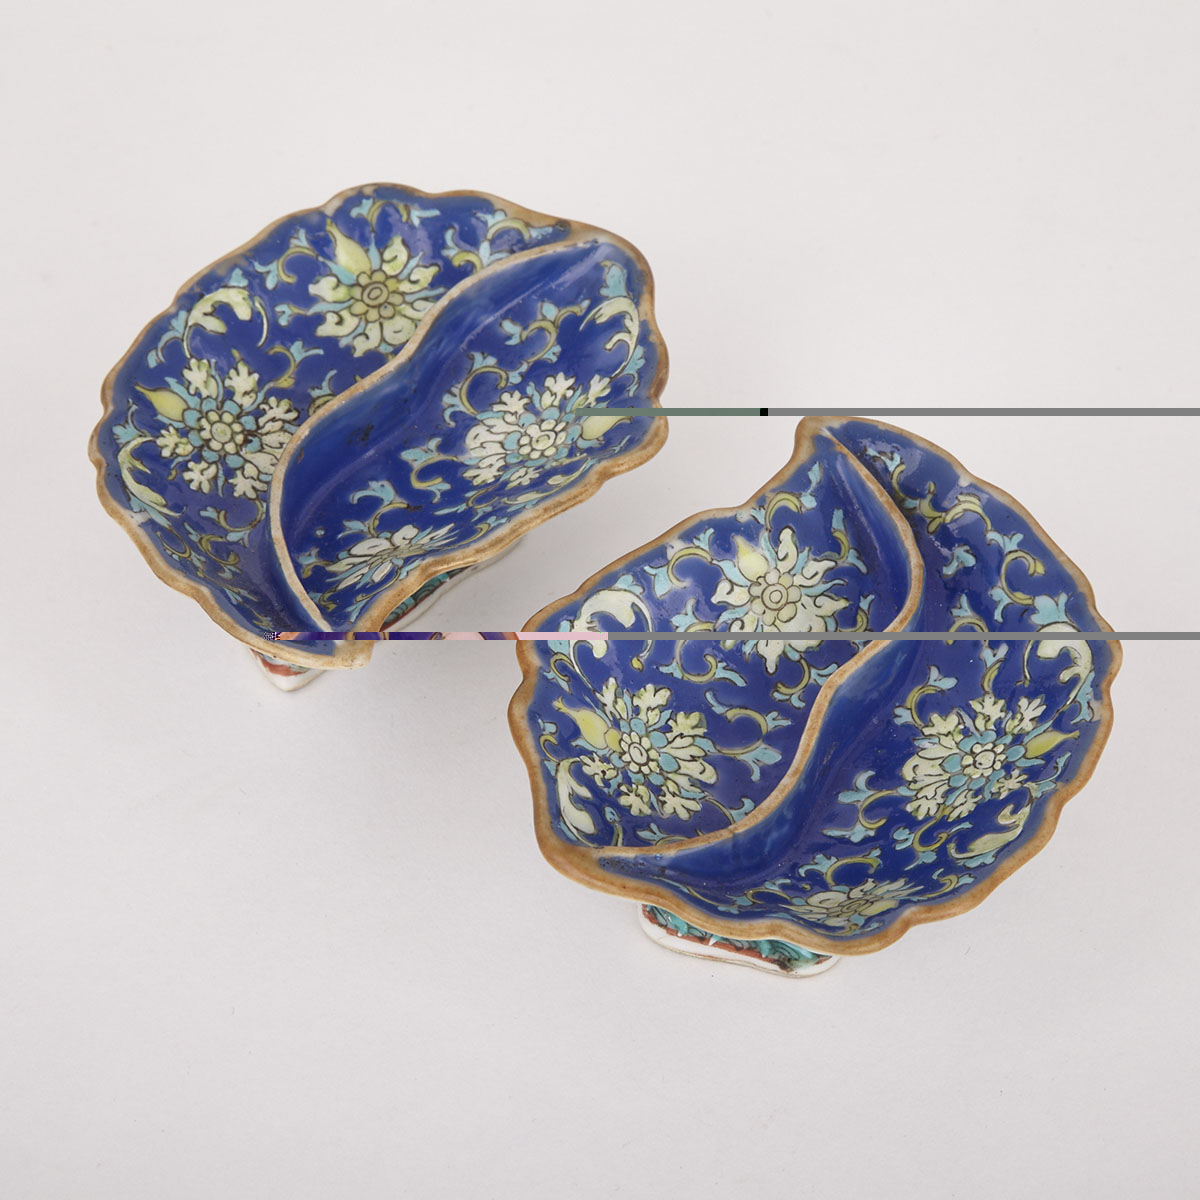 Pair of Blue-Ground Famille Rose Shaped Dishes Together with Six Sets of Silver-Tipped Chopsticks